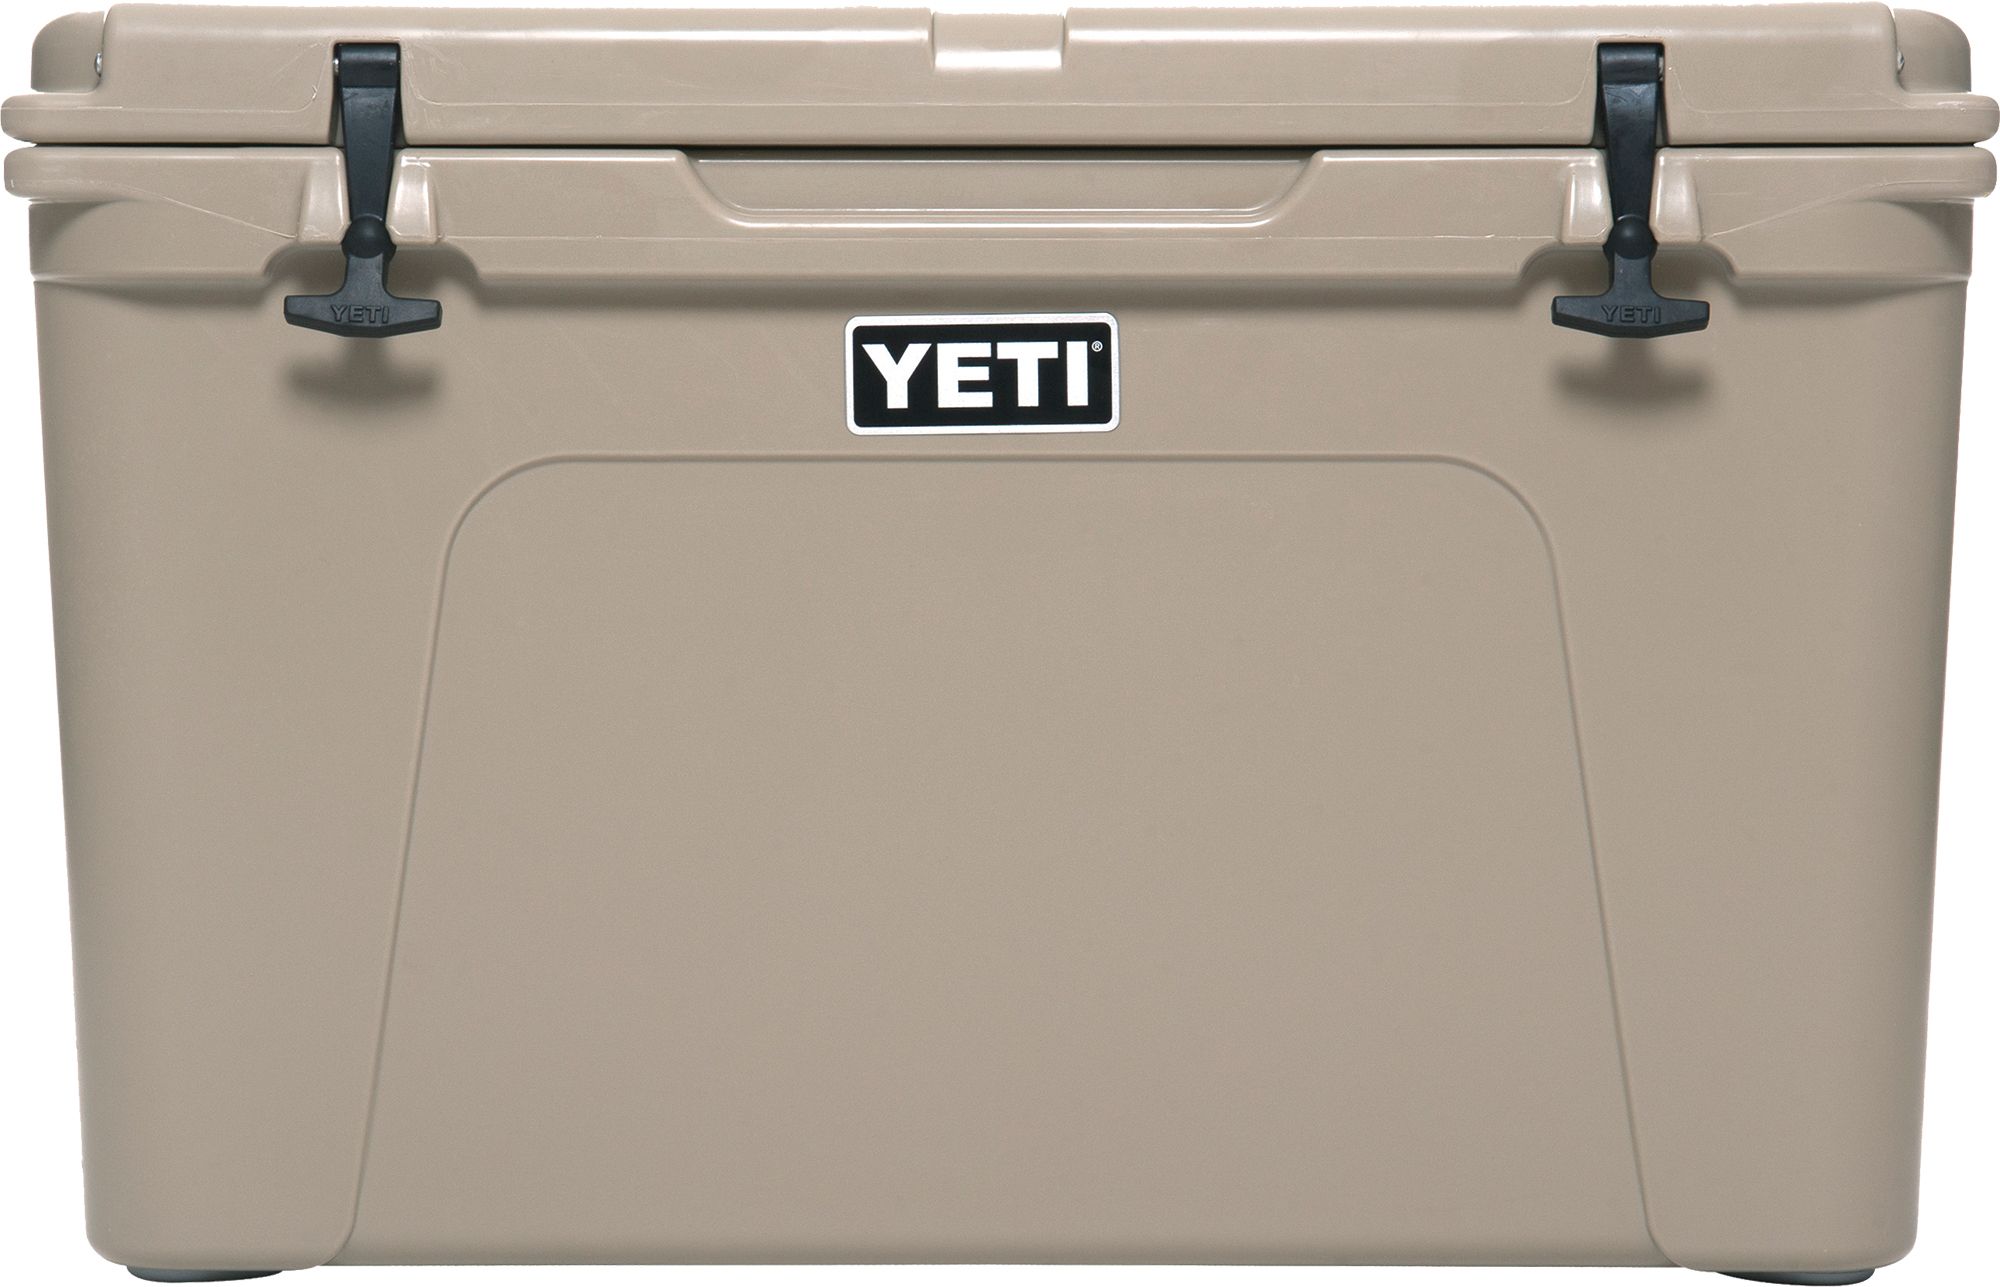 Yeti Sale Curbside Pickup Available At Dick S